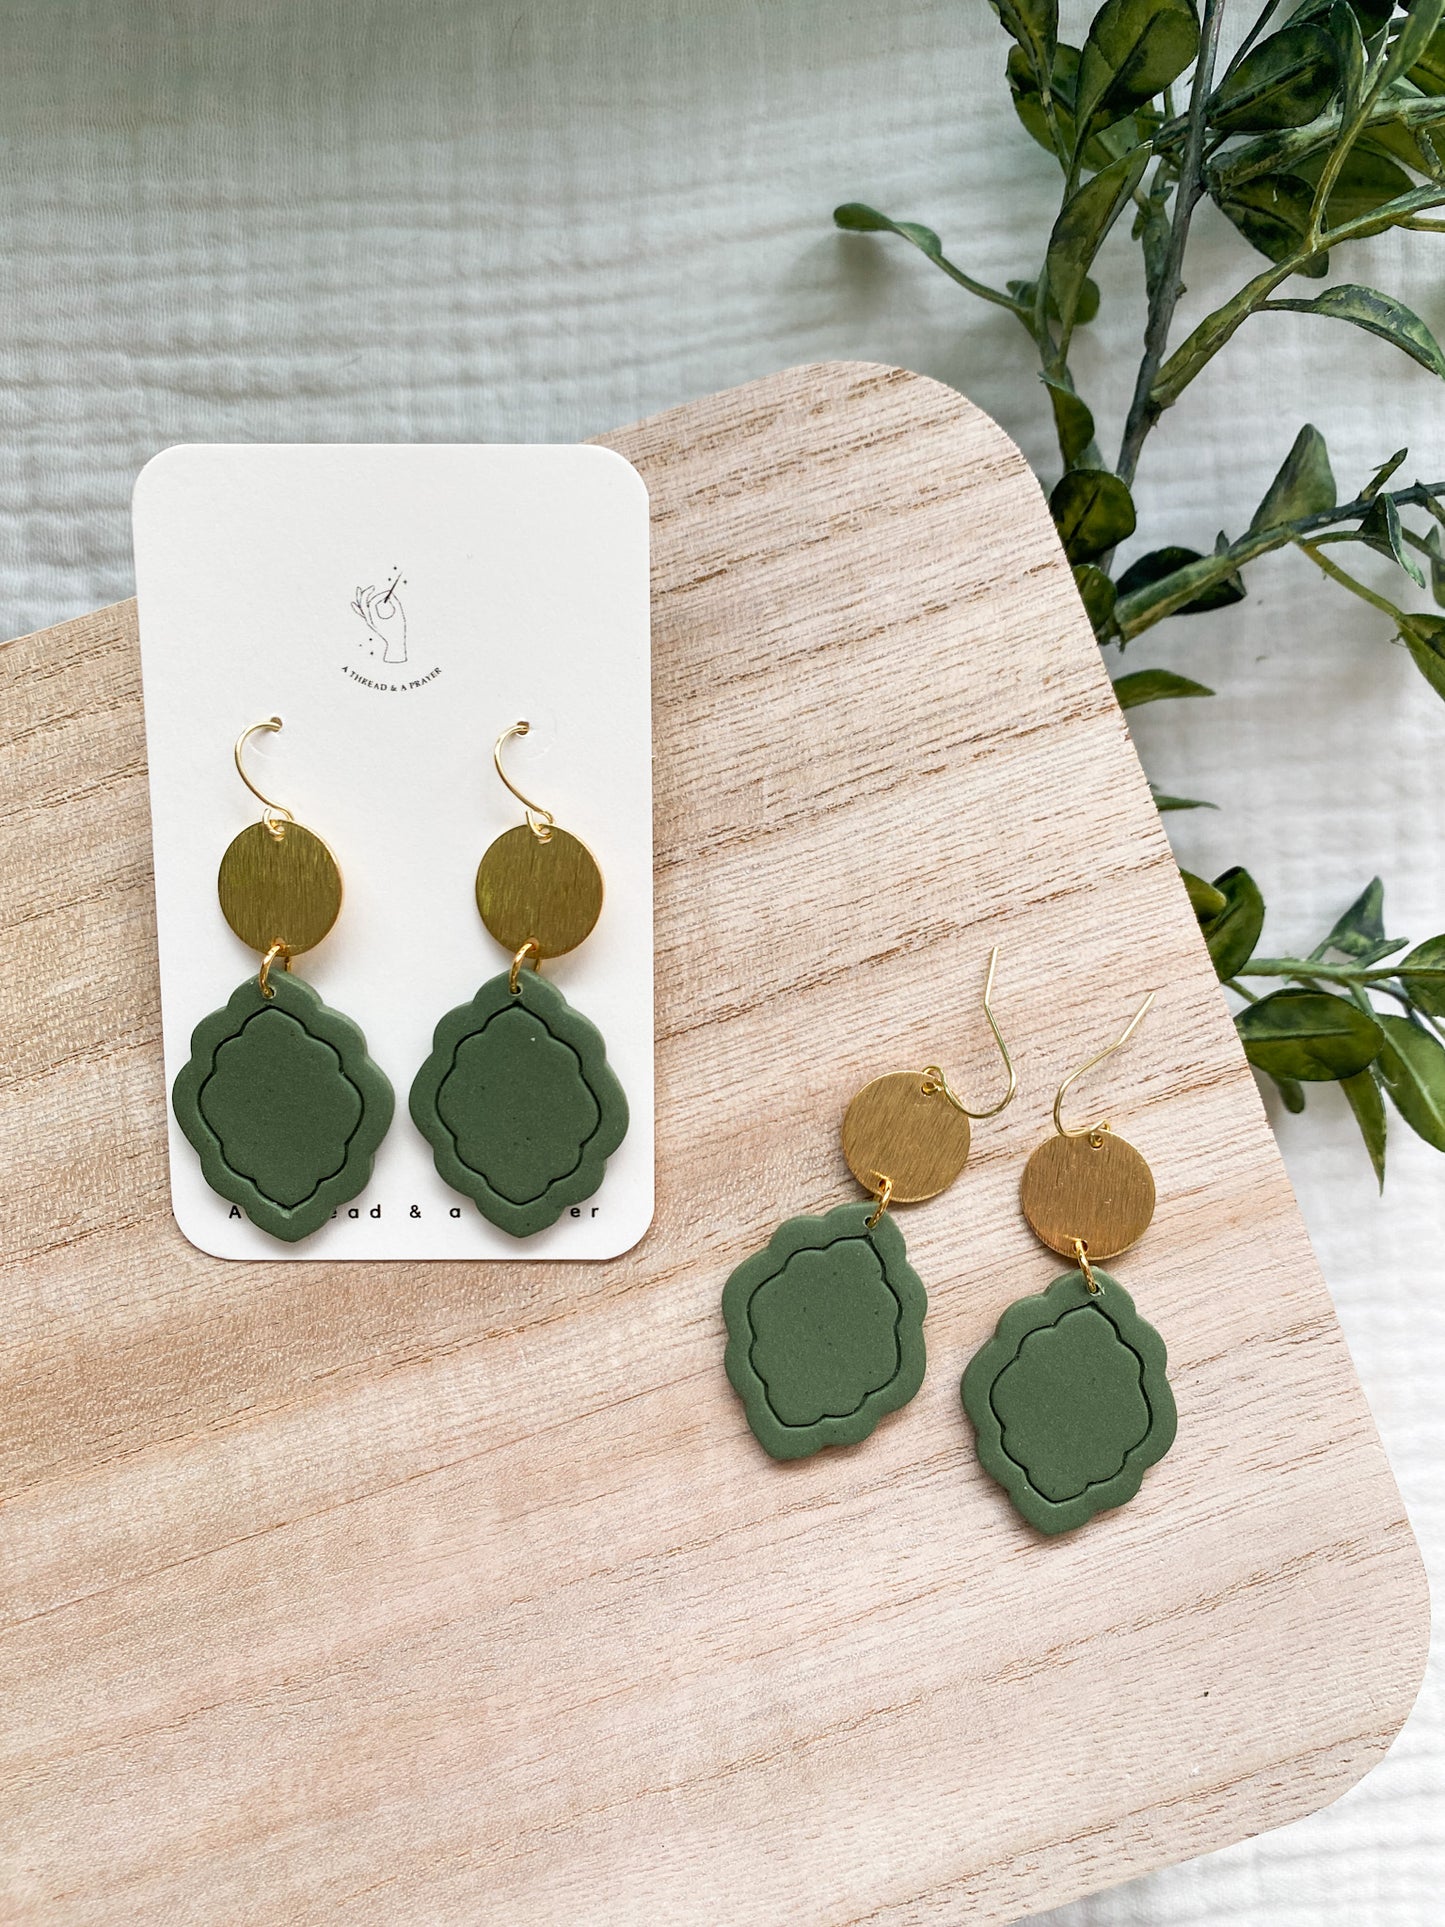 Spring Style Green Clay an Brass Earrings | Olive Green | Polymer Clay and Brass Accent | Lightweight Earrings